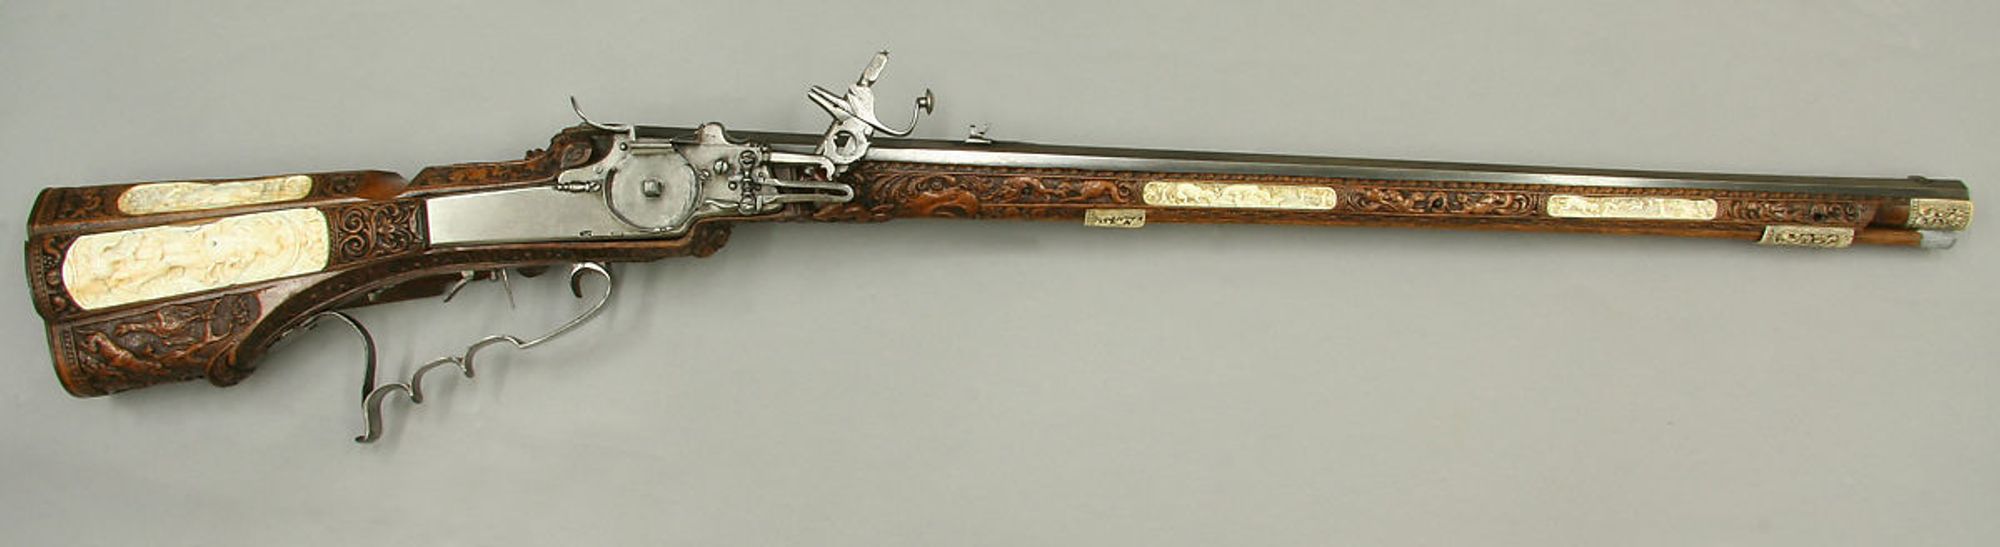 A photograph of an antique rifle belonging to Leopold.